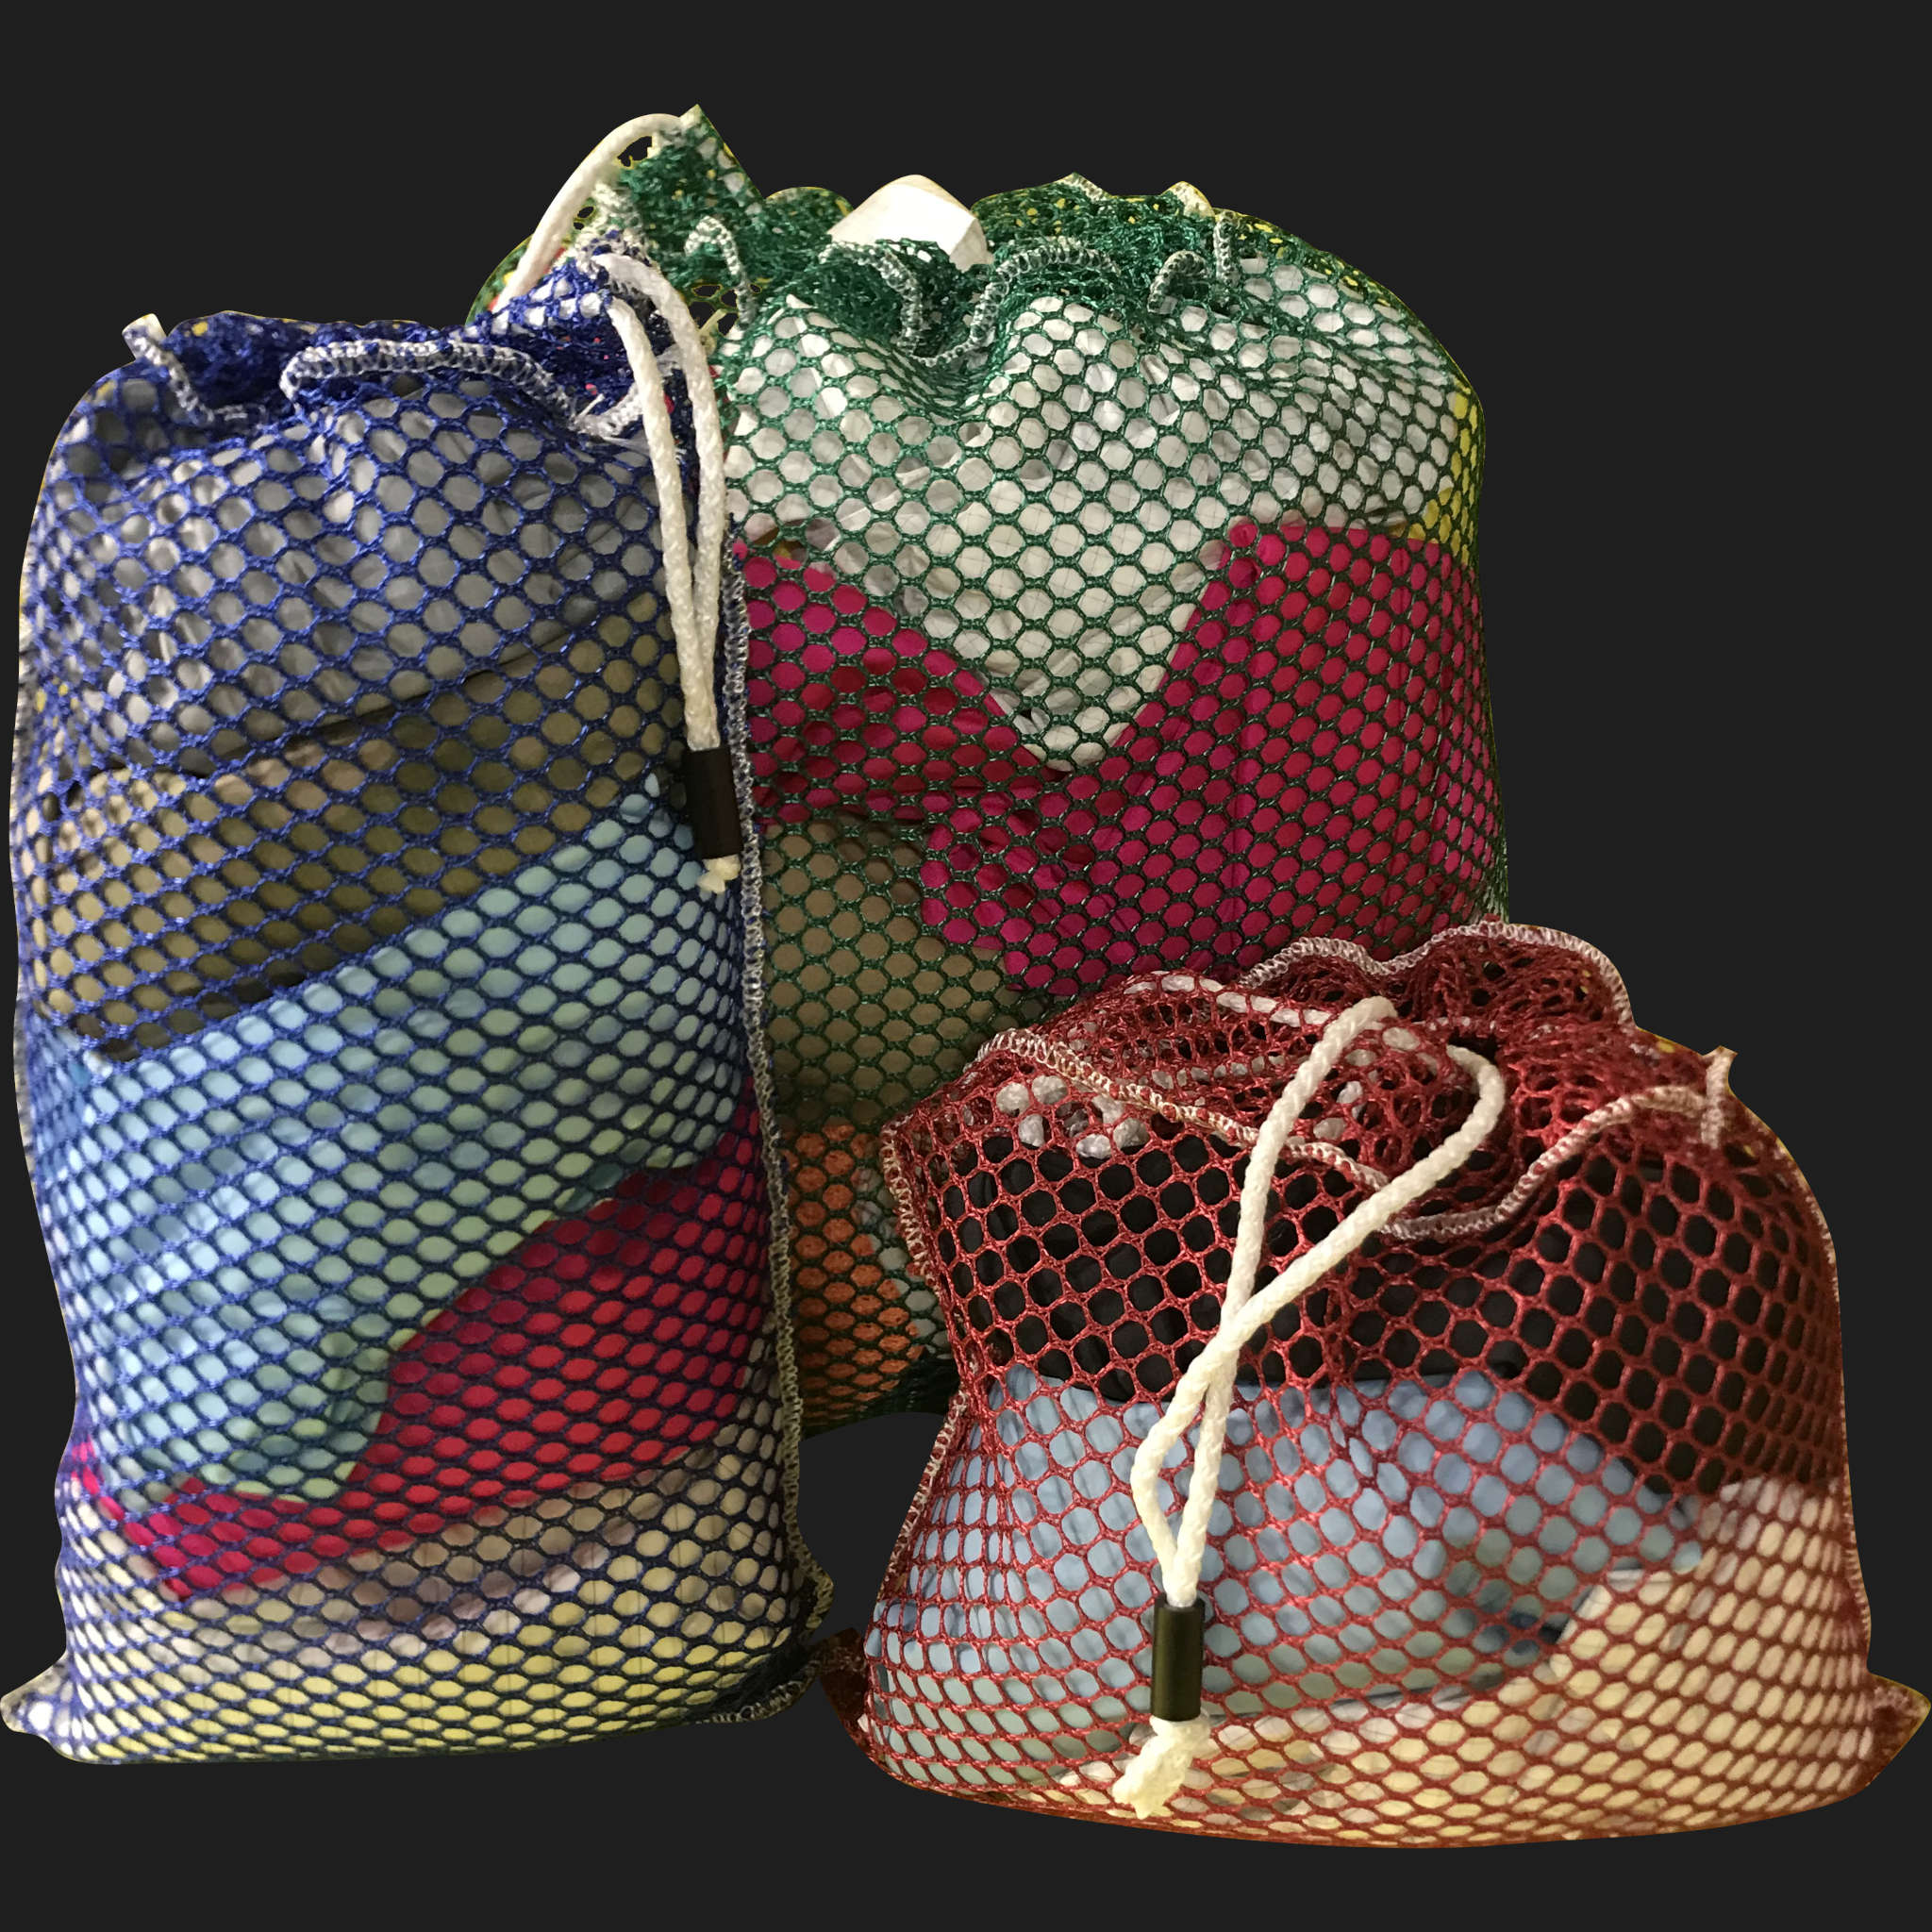 56" x 74" Customized Mesh-Net-Laundry Bags Heavy Duty with Cord and barrellock closure